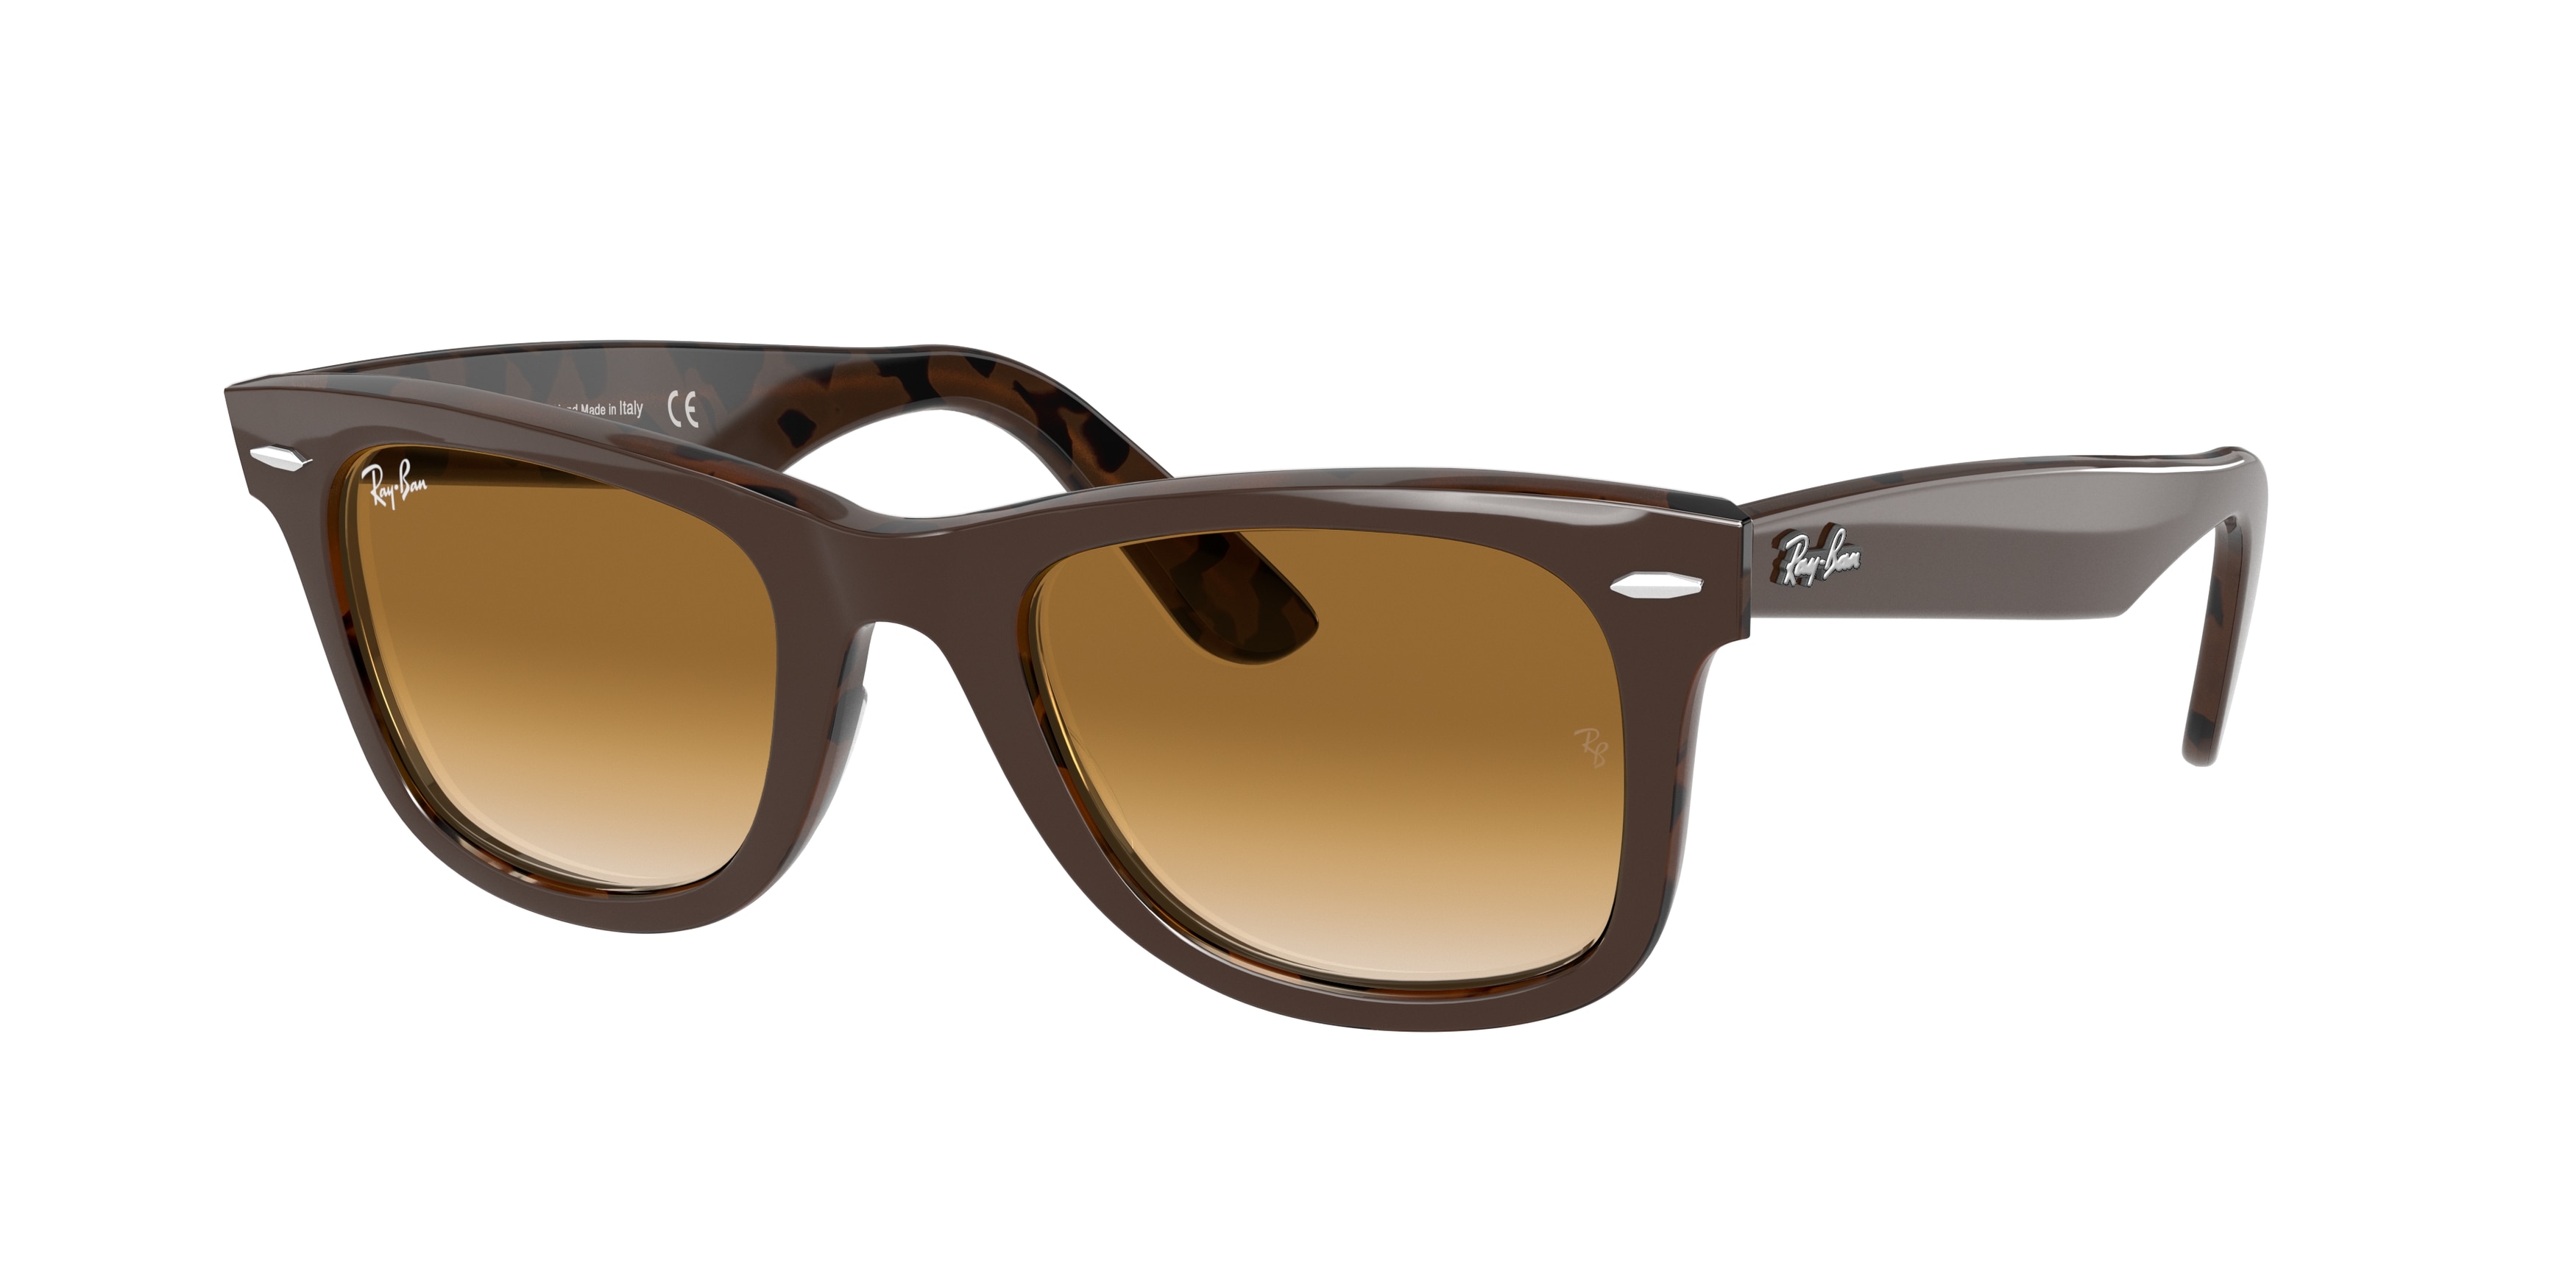 rayban_0rb2140_127651_brown_ref